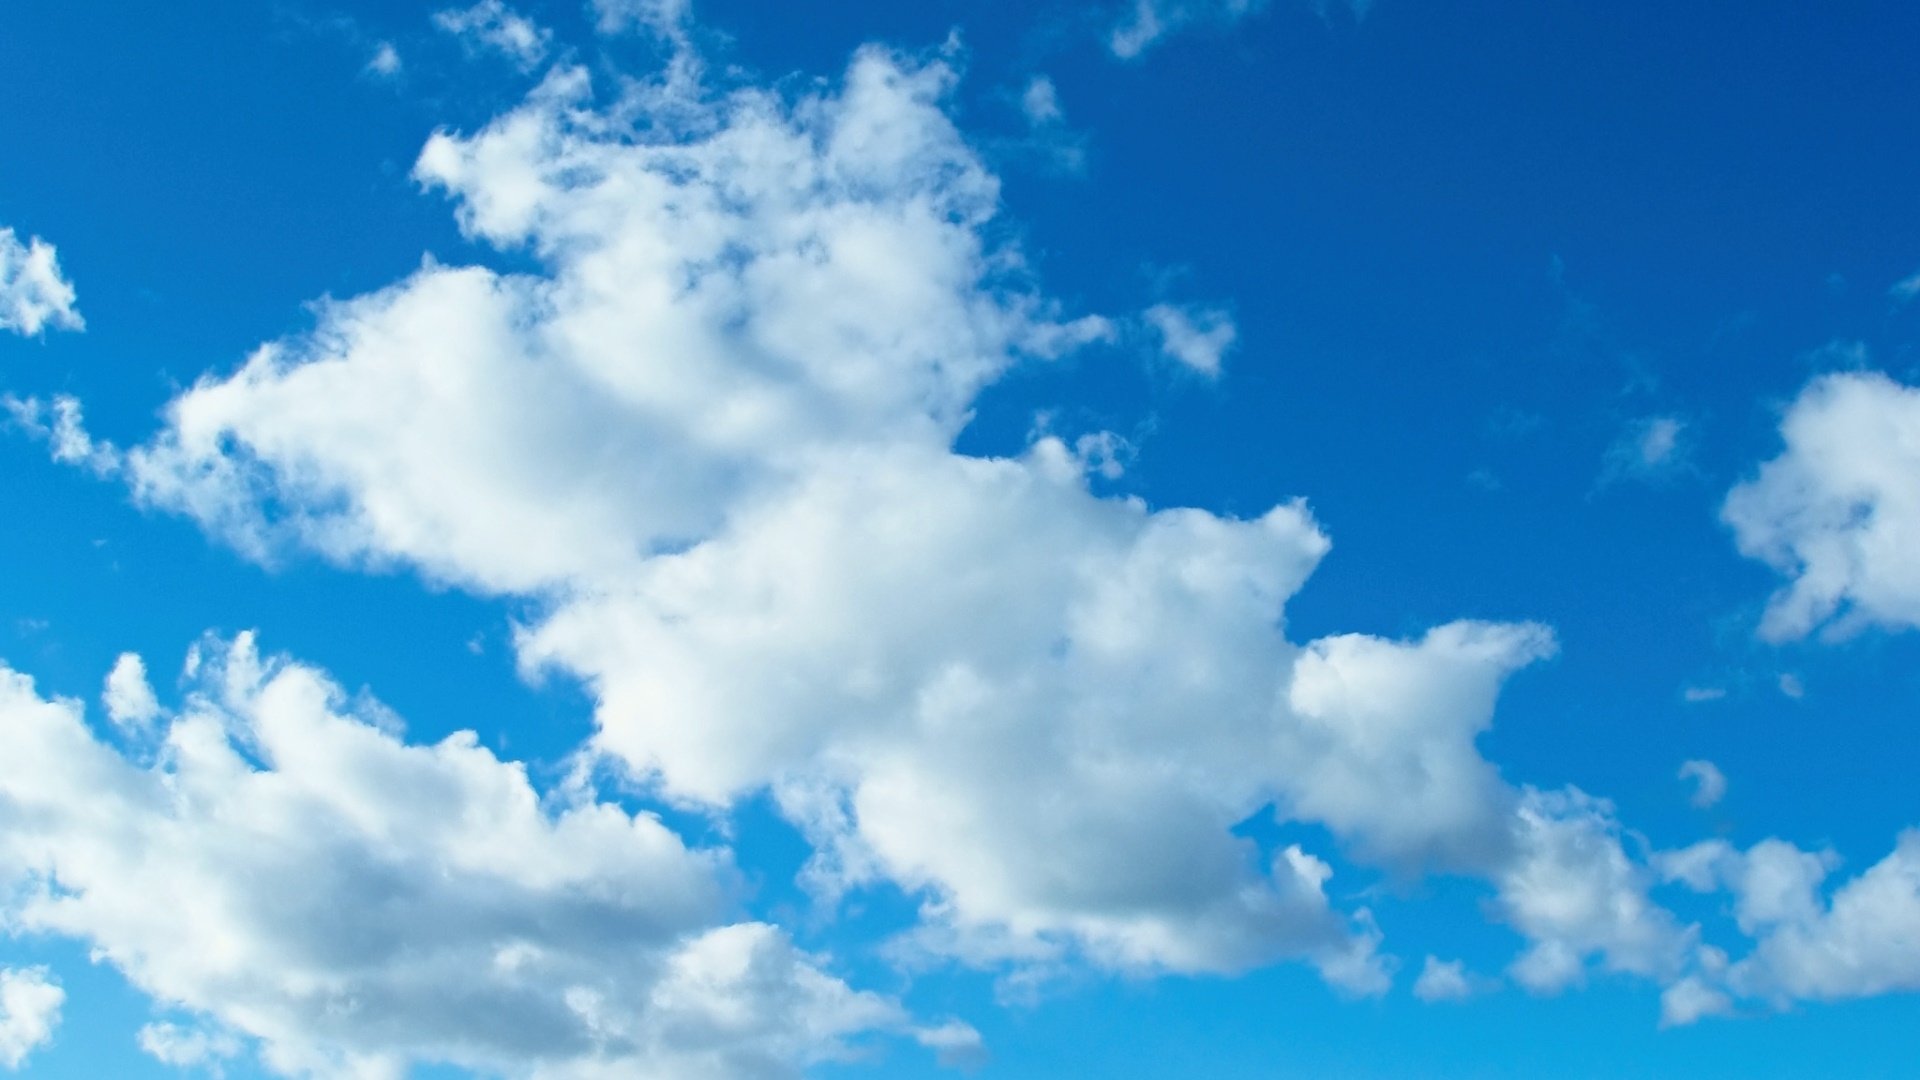 White Puffy Clouds In Blue Sky Hd Wallpaper Background Image 19x1080 Id Wallpaper Abyss